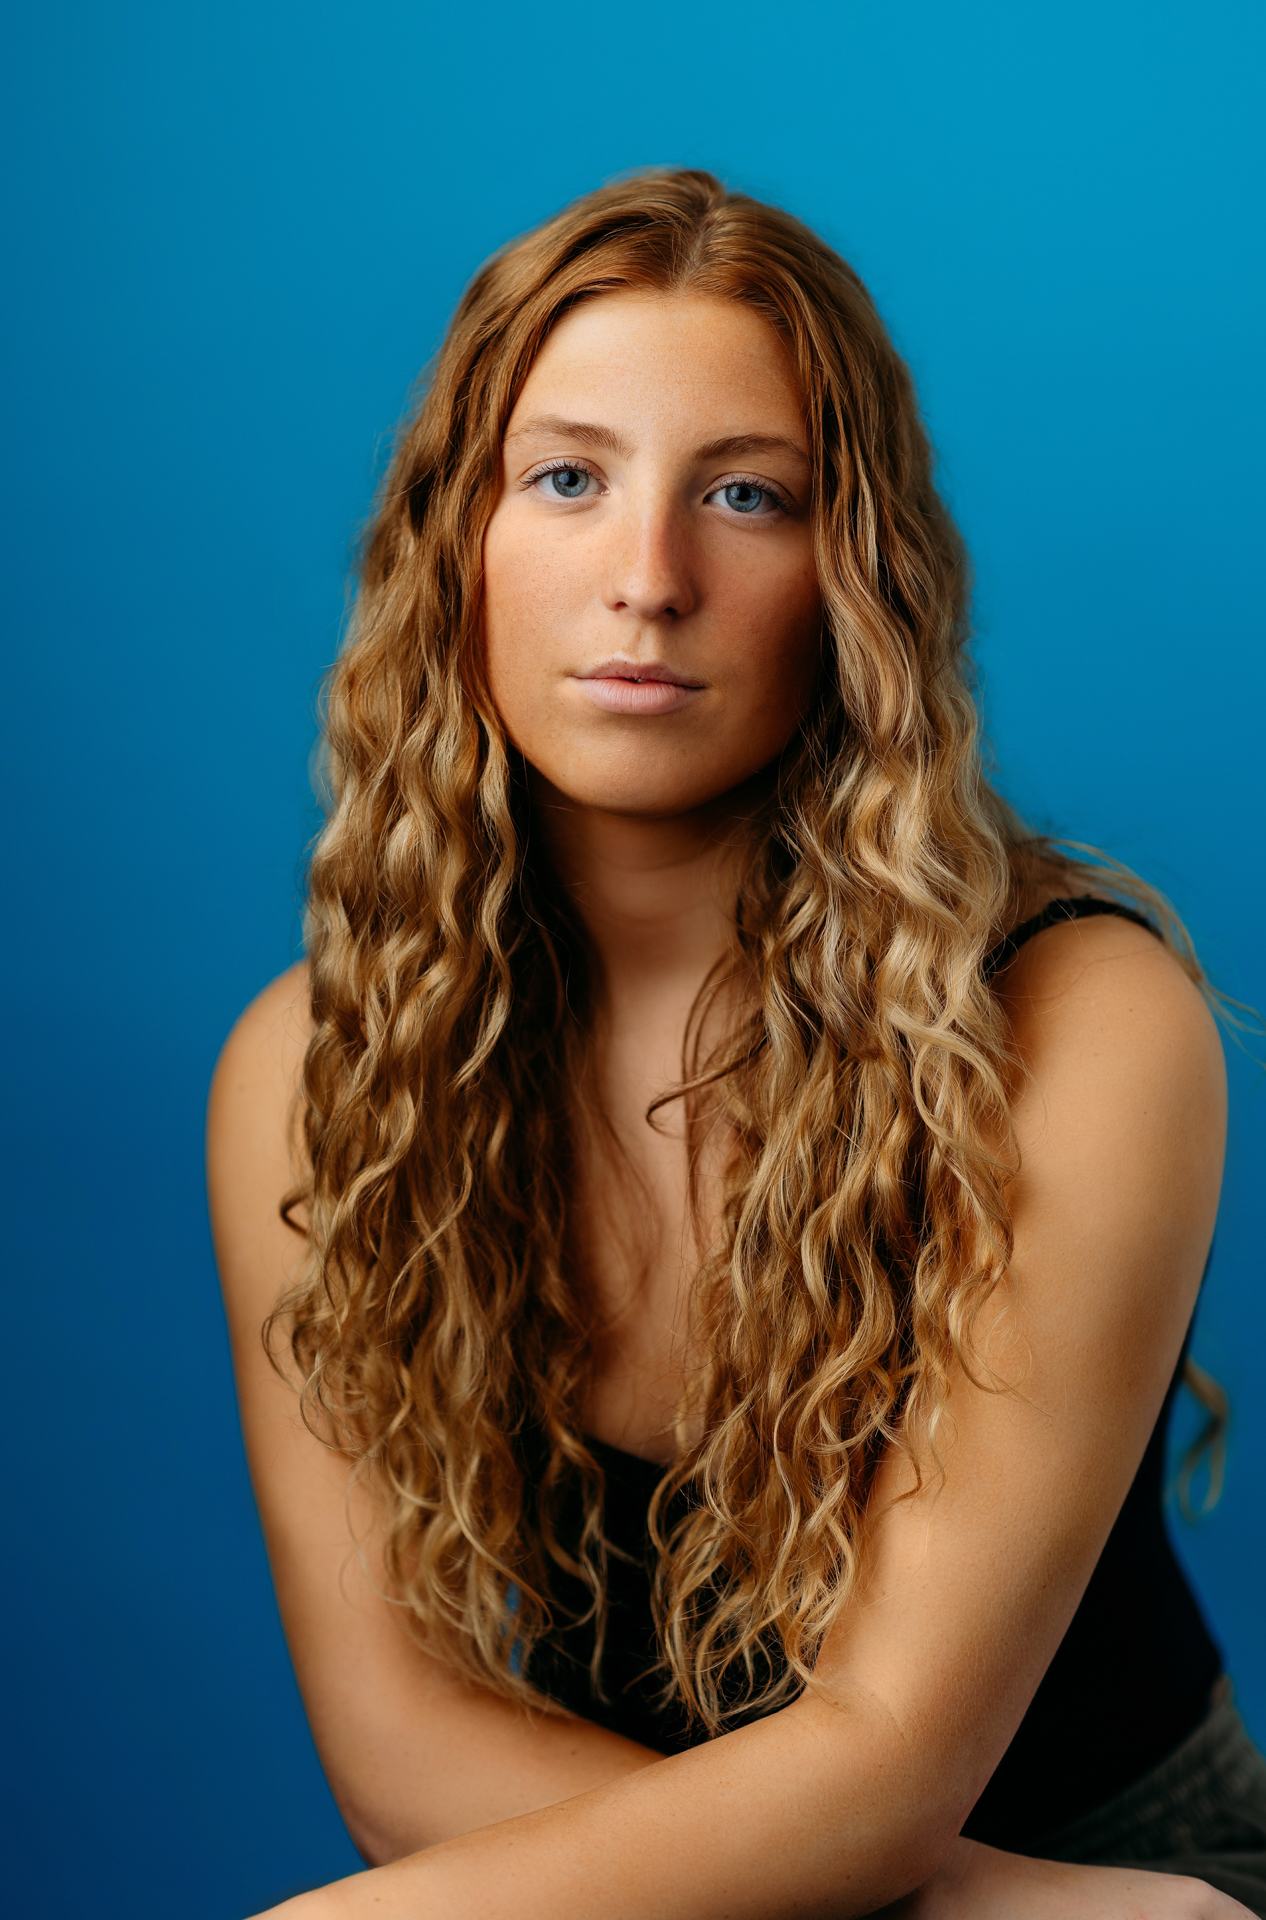 Professional actor headshot of young woman with long curly strawberry blond hair on bright blue background